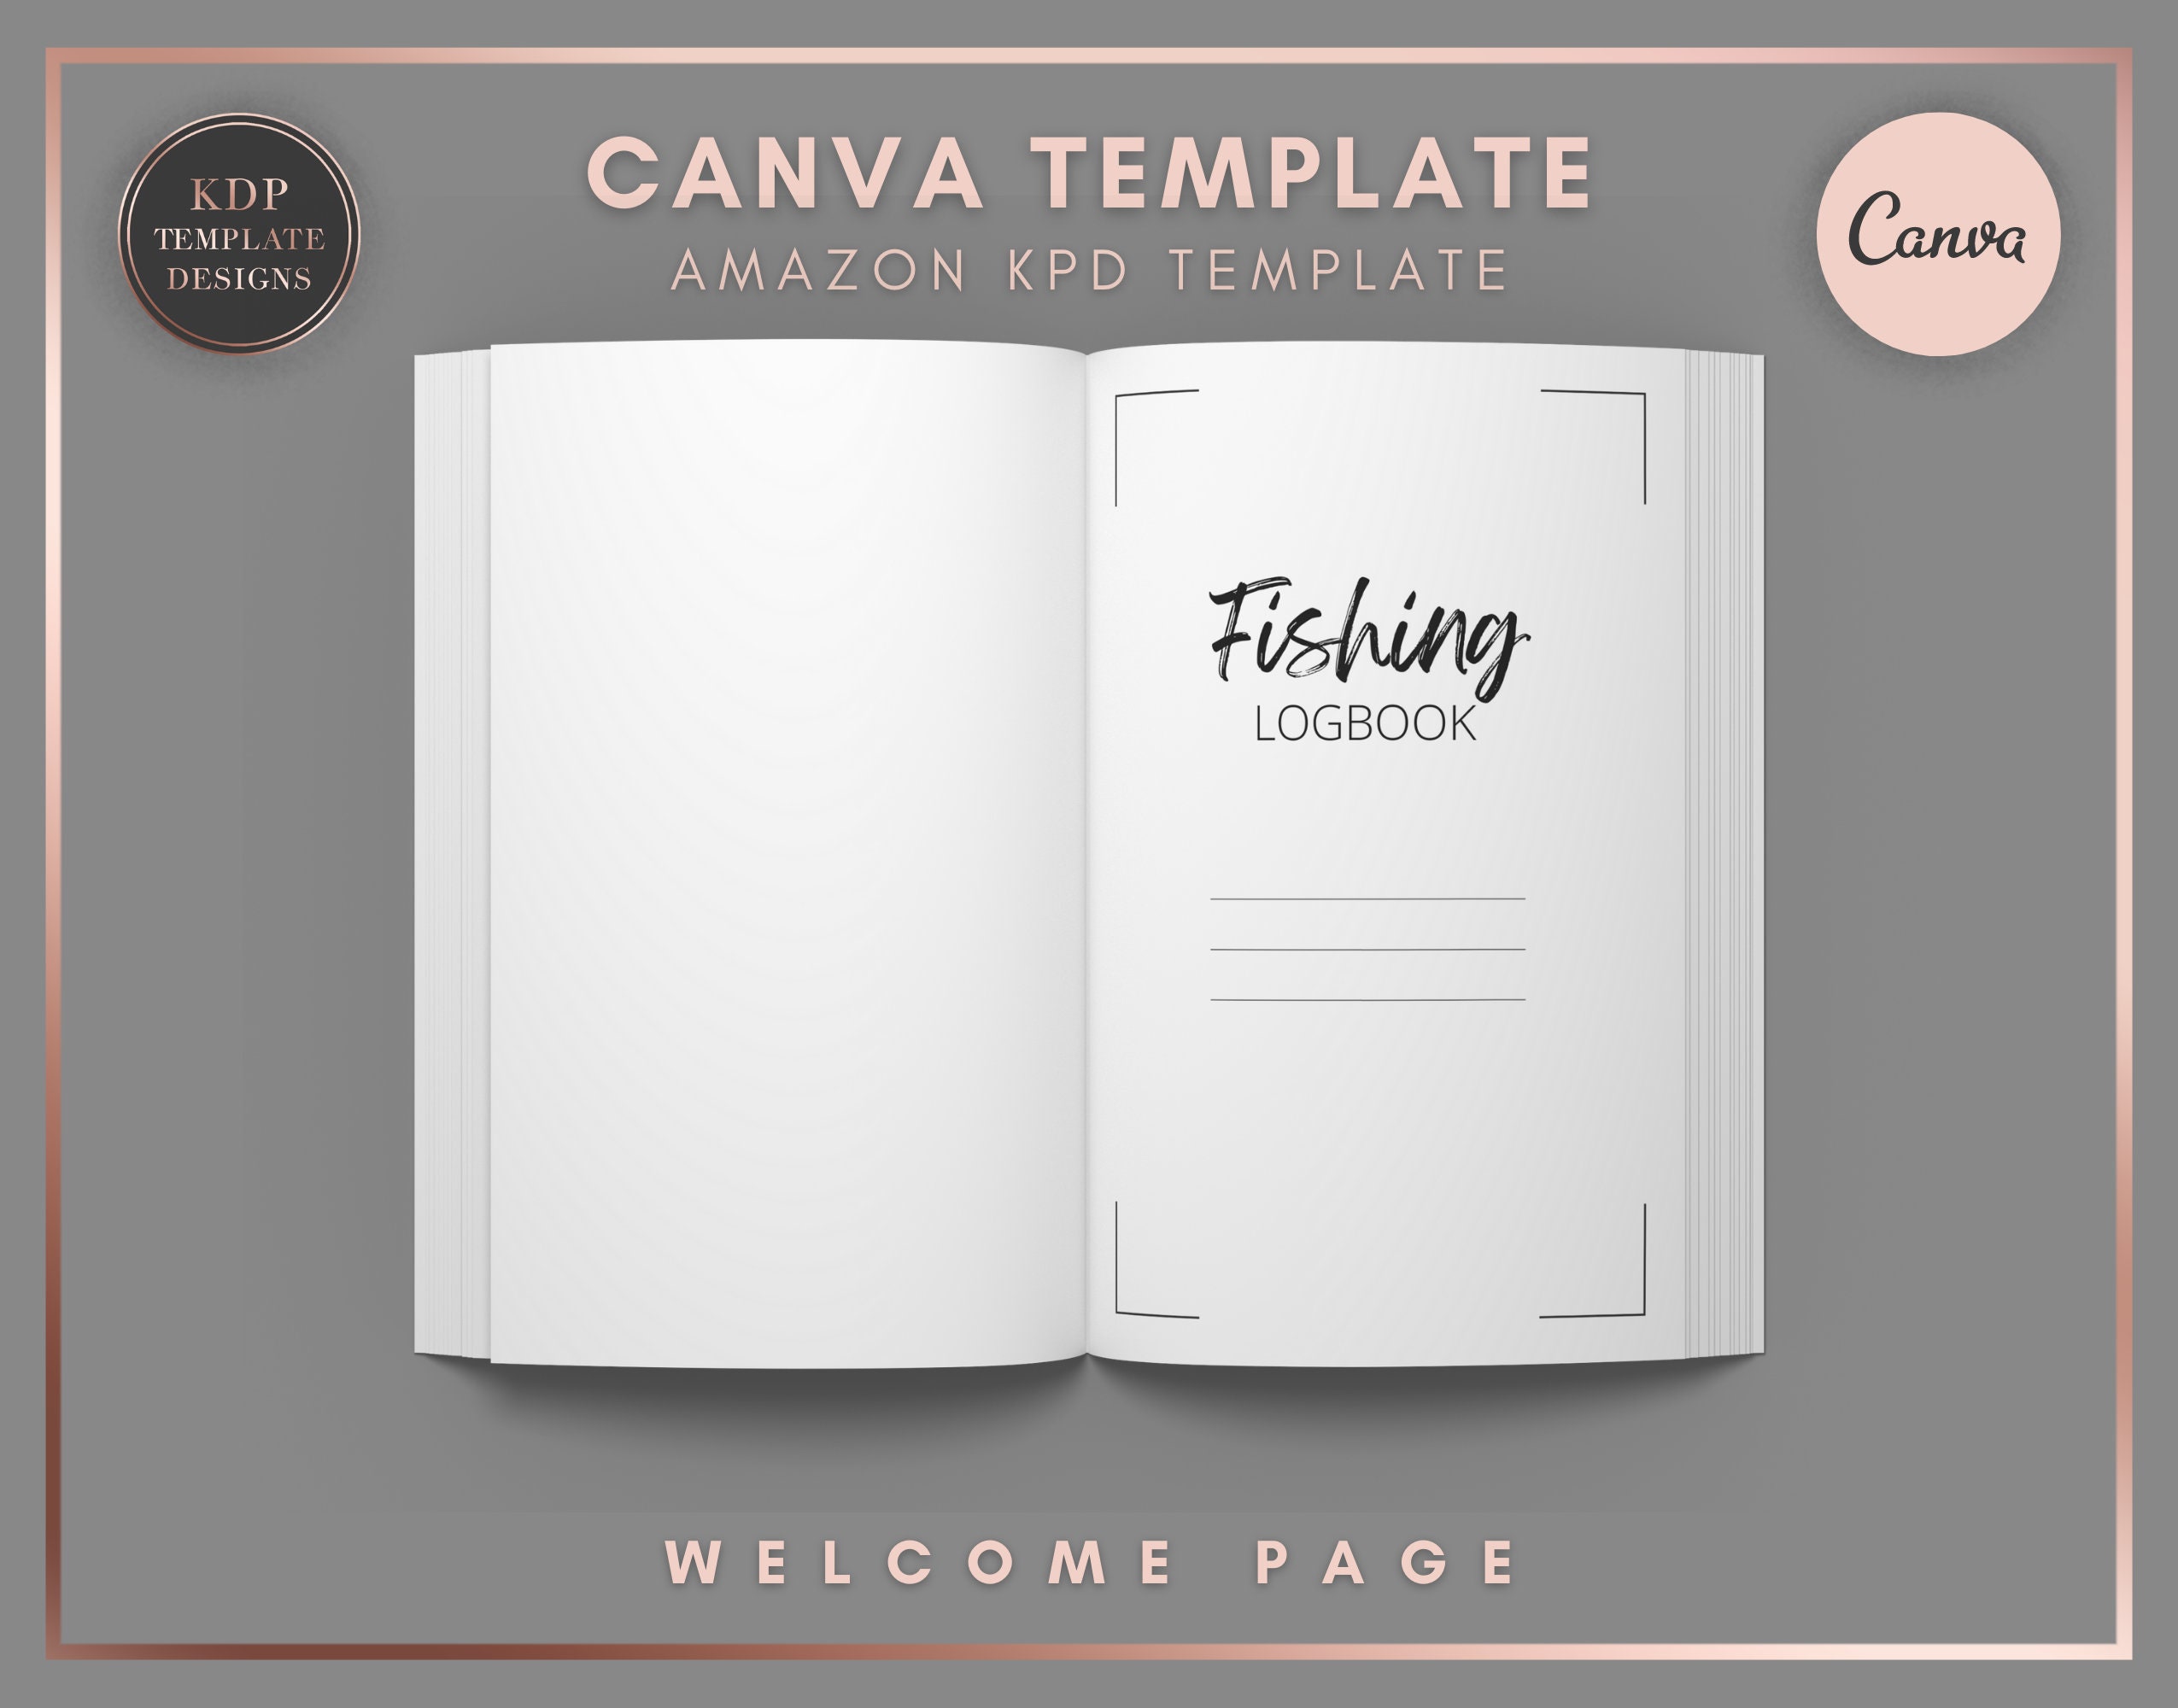 Fishing Logbook CANVA Template Editable & Customizable 6x9 Inches with  Bleed Commercial Use KDP Template 